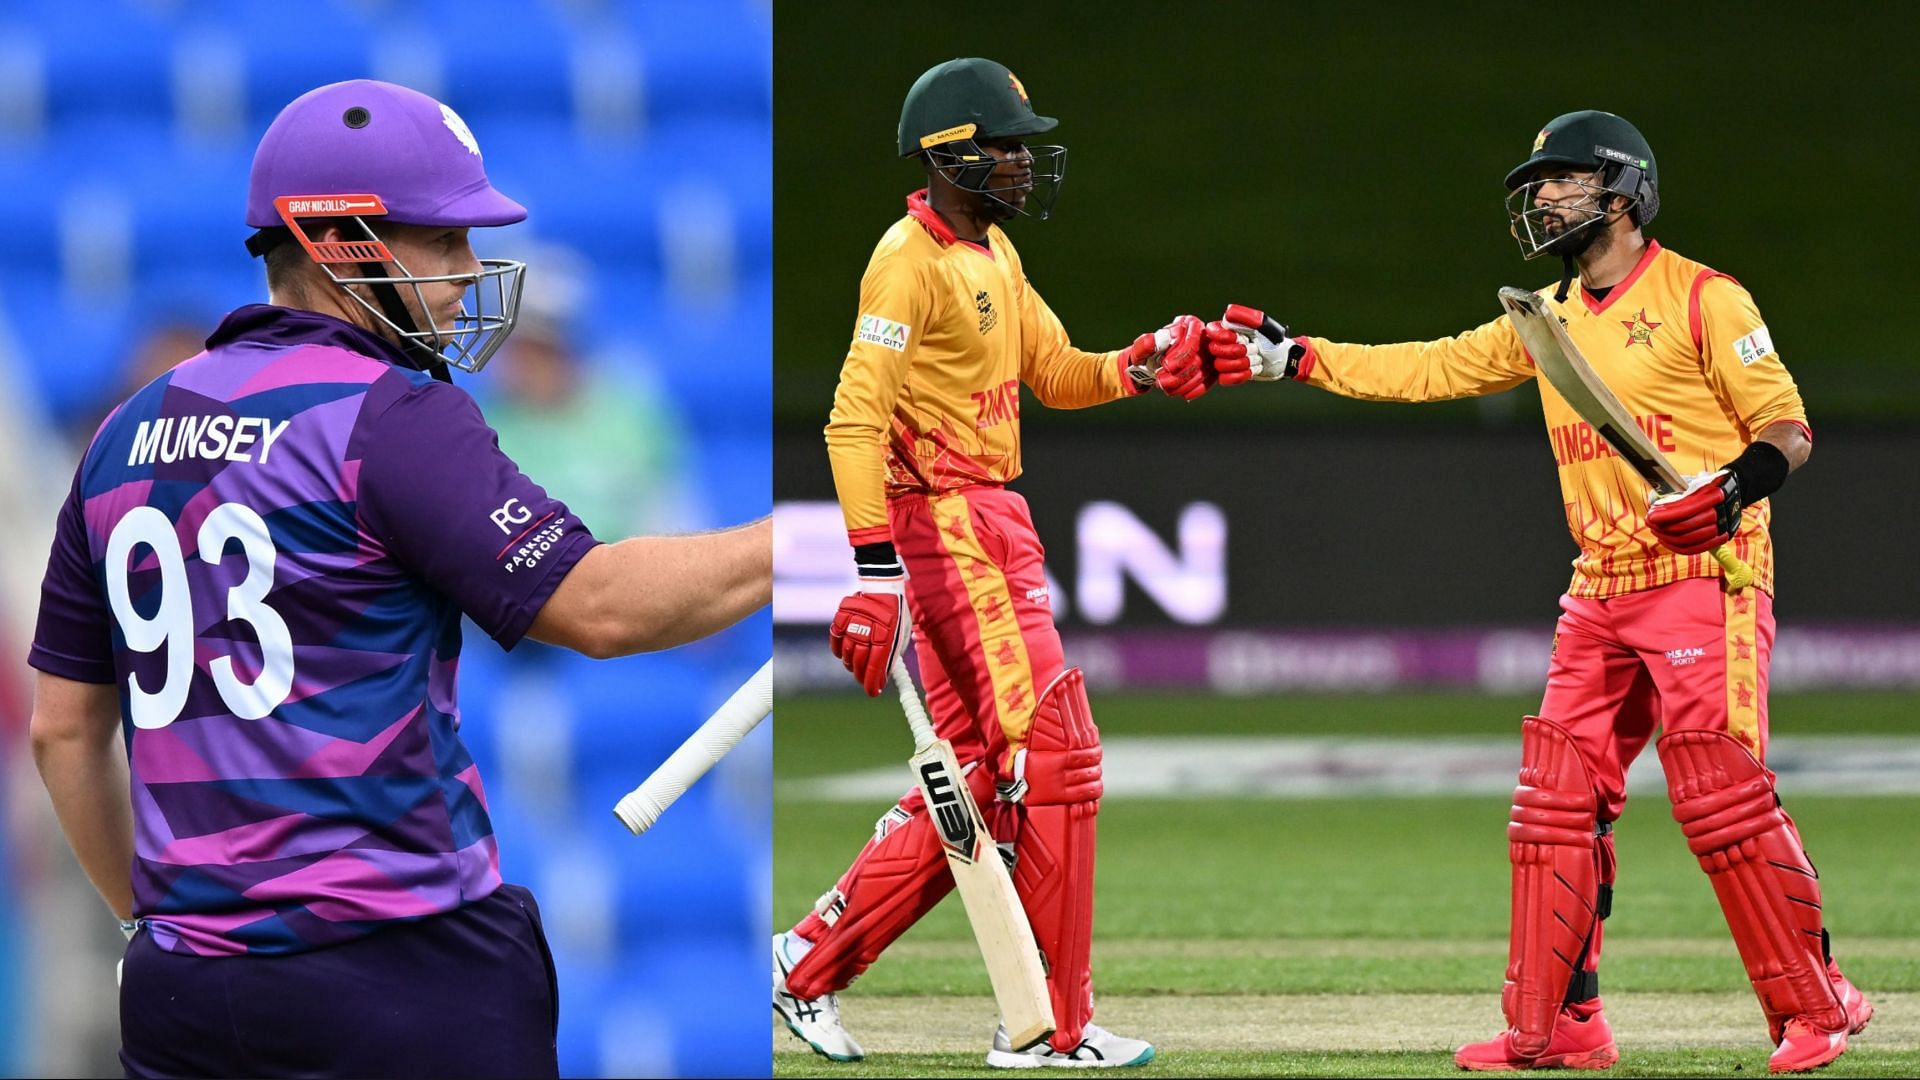 Scotland and Zimbabwe can advance to the Super 12 tomorrow (Image: Twitter/ICC)